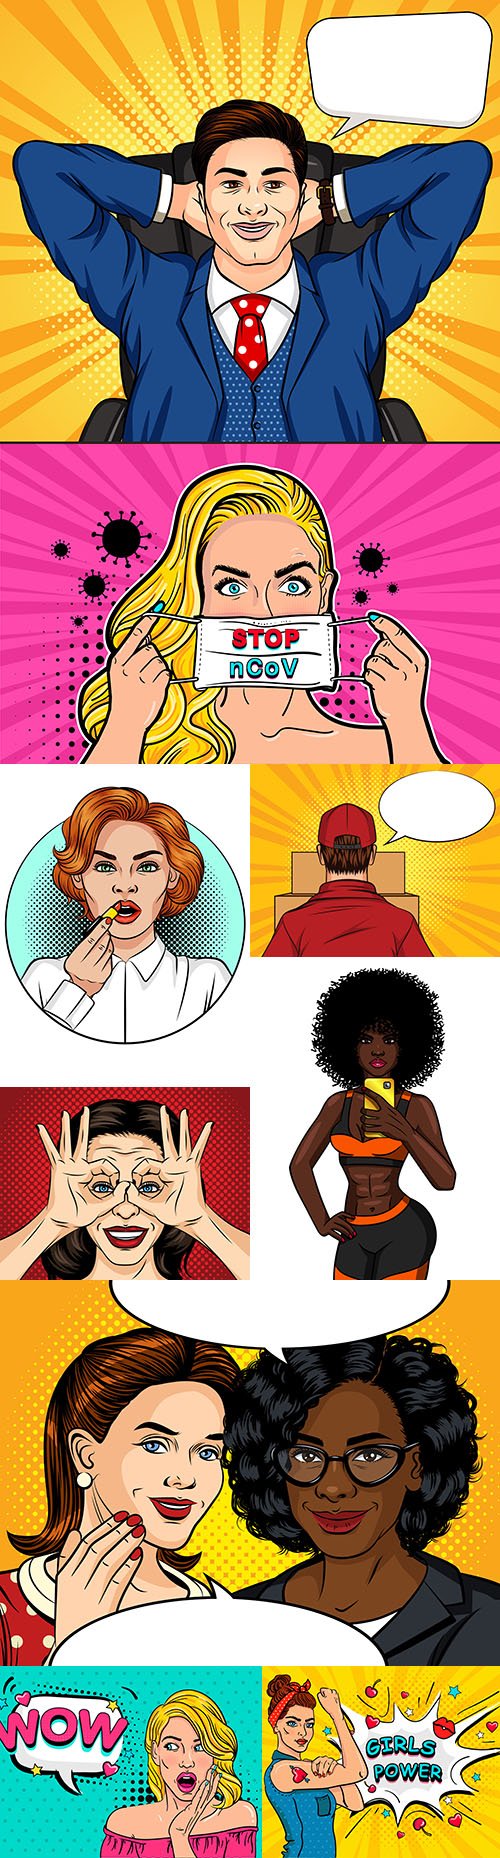 Man and woman comic illustrations in pop art style